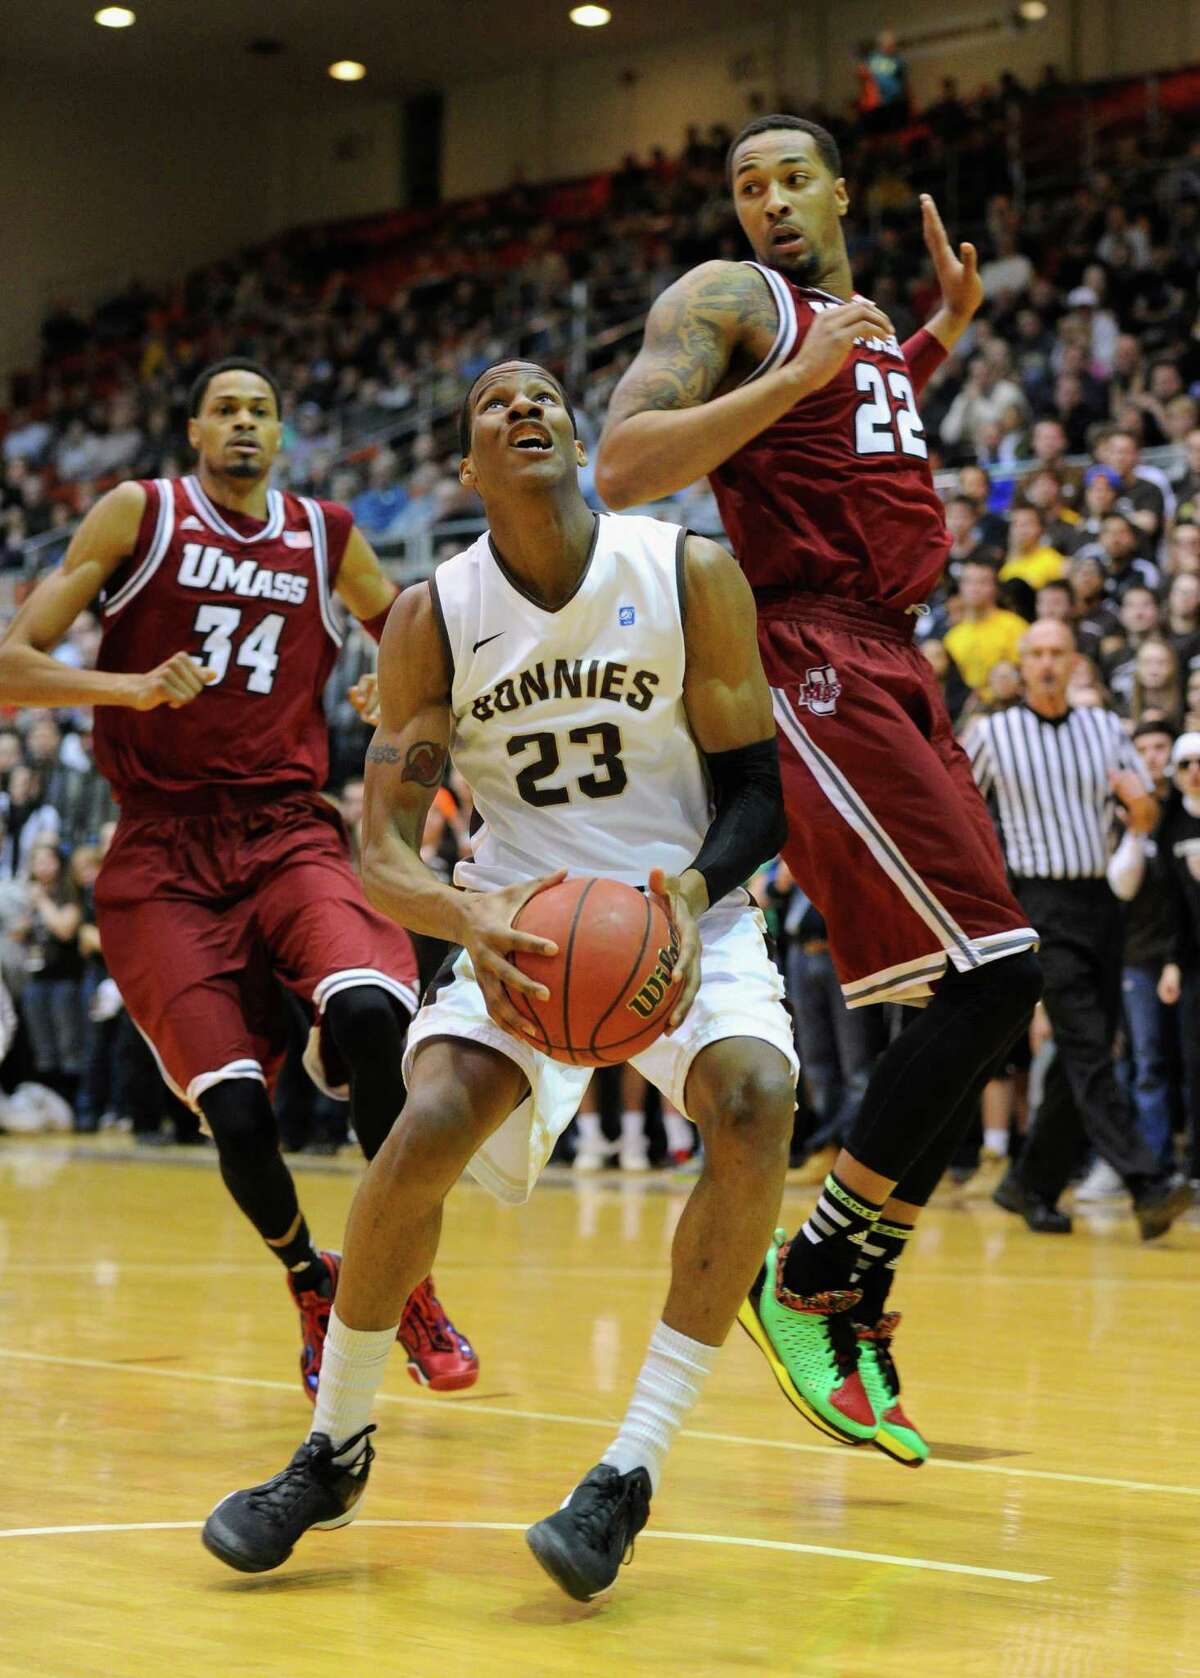 OLEAN, NY - JANUARY 29: Andell Cumberbatch #23 of the St. Bonaventure Bonnies drives to the basket against the defense of Sampson Carter #22 of the Massachusetts Minutemen during the first half at the Reilly Center on January 29, 2014 in Olean, New York. St. Bonaventure defeated Massachusetts 78-65. (Photo by Rich Barnes/Getty Images) ORG XMIT: 461948565